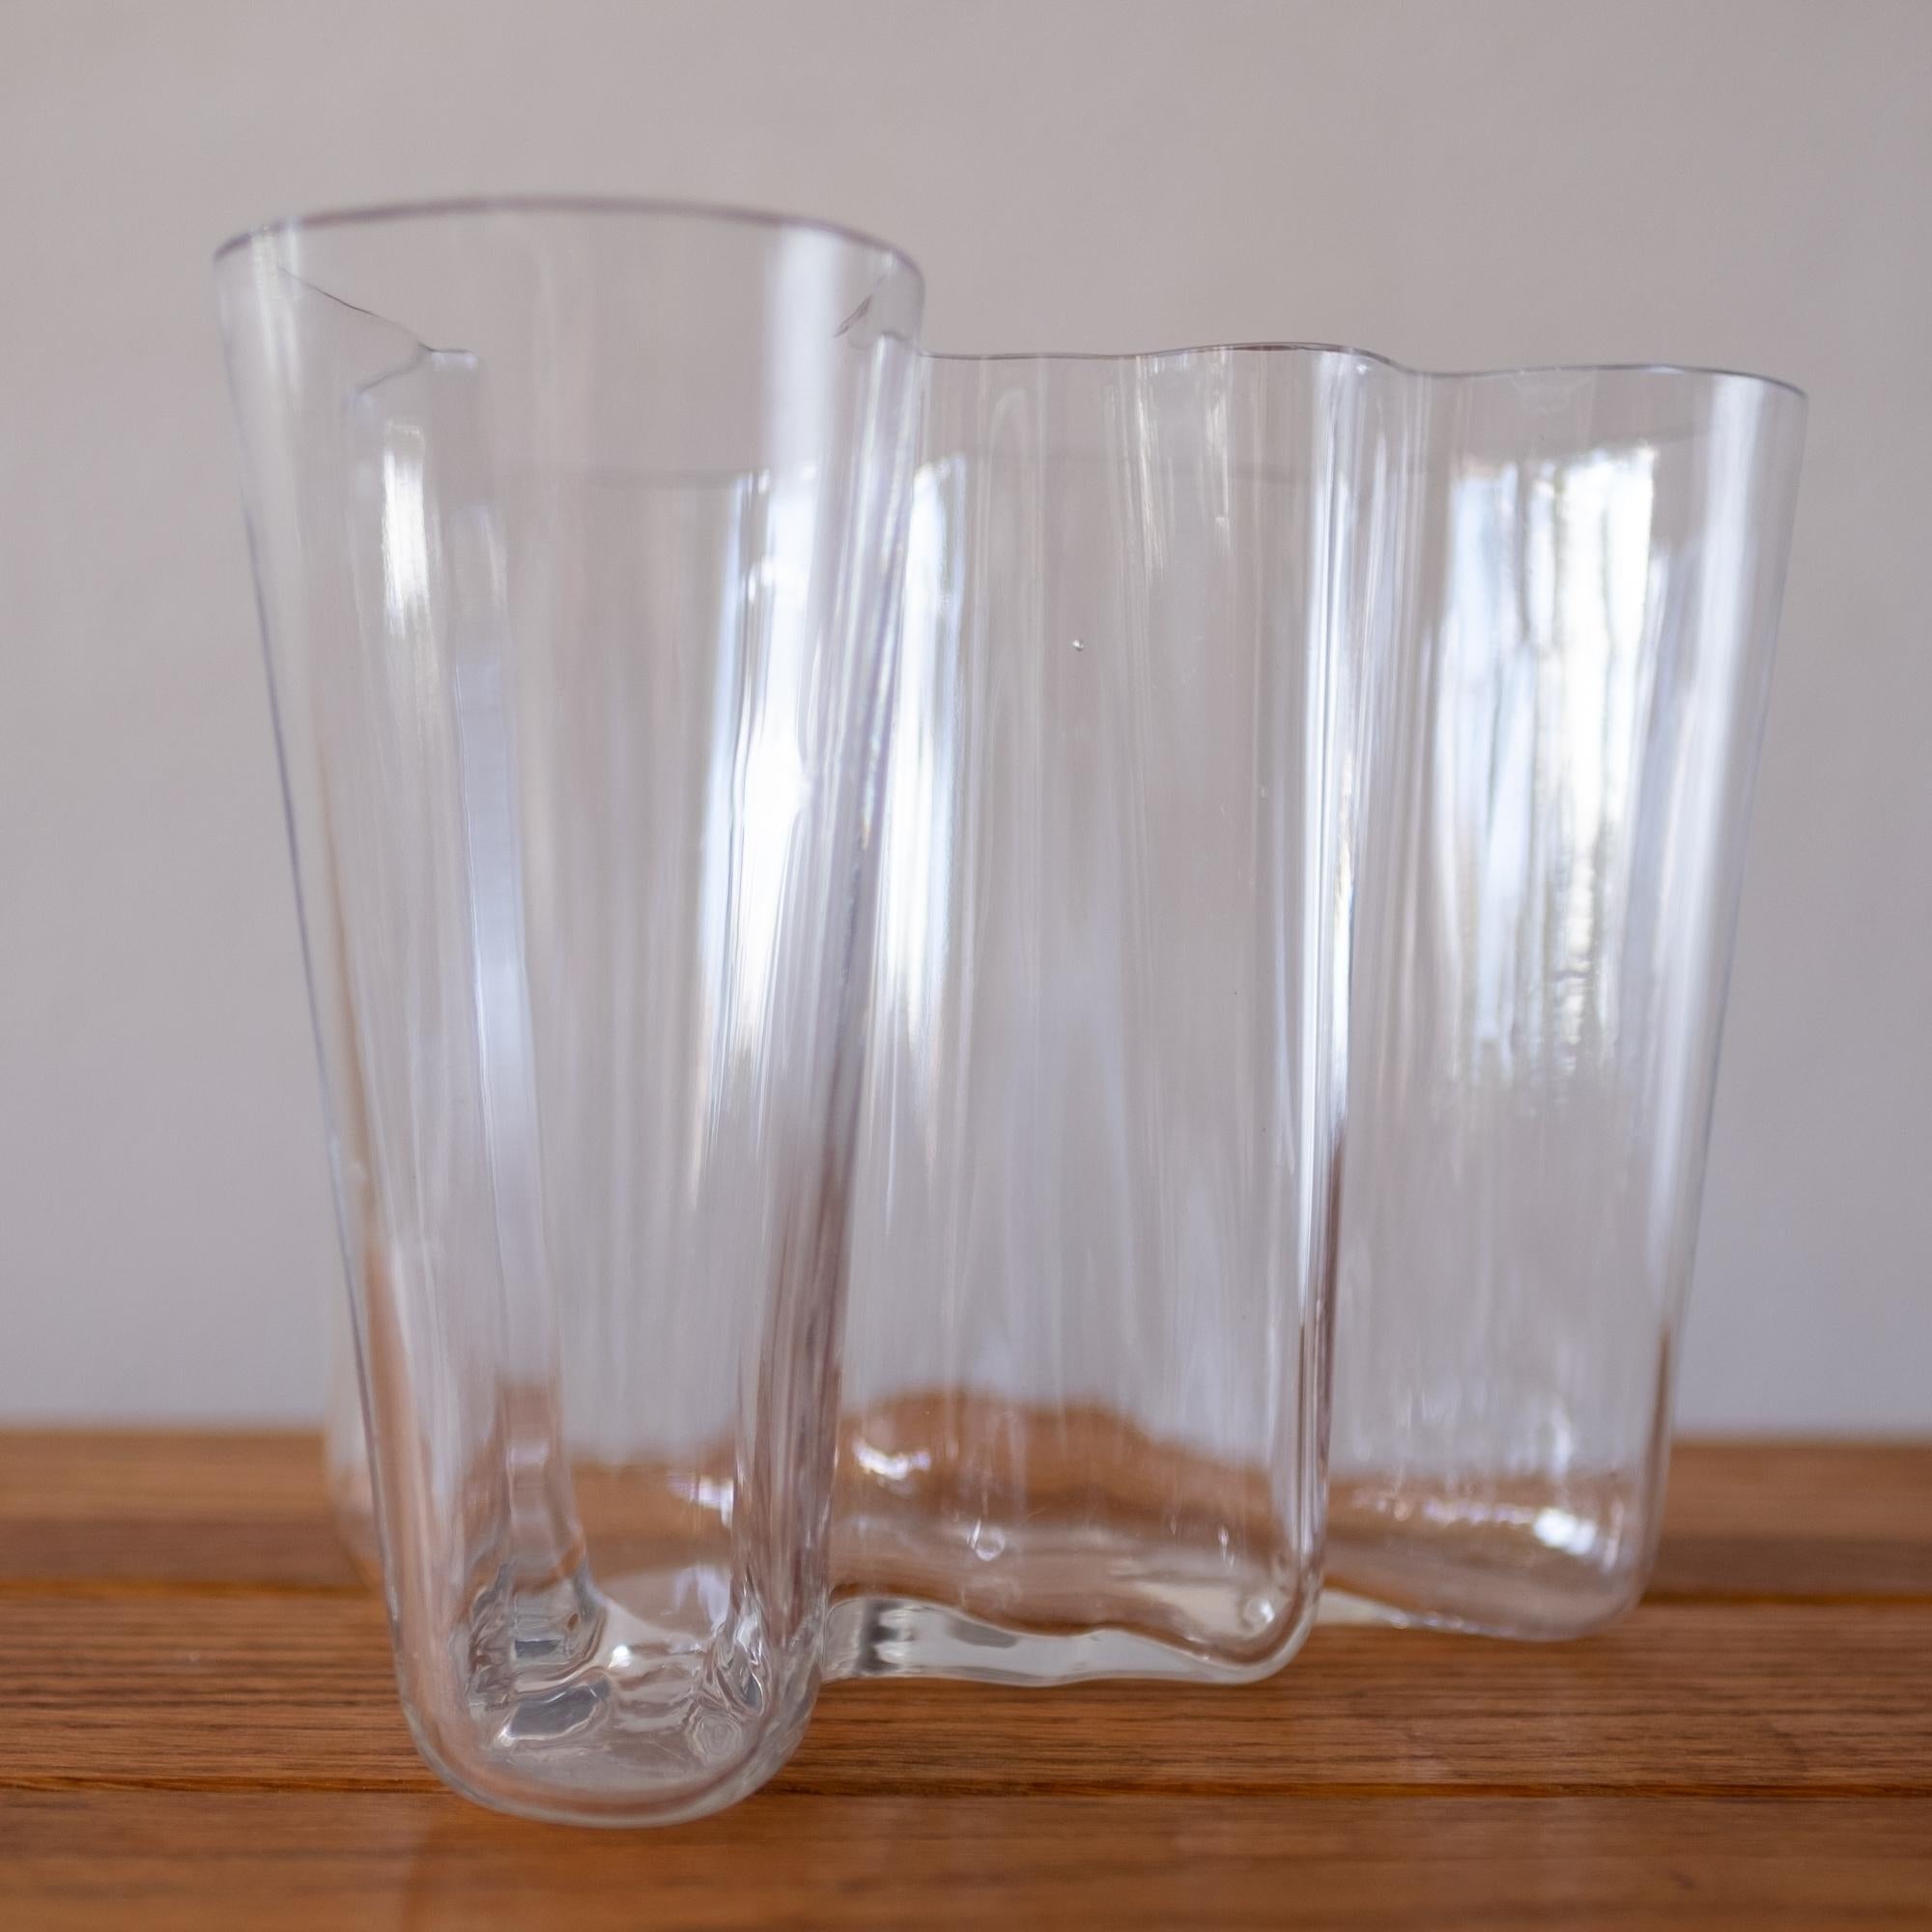 Early Savoy Glass by Alvar Aalto 4